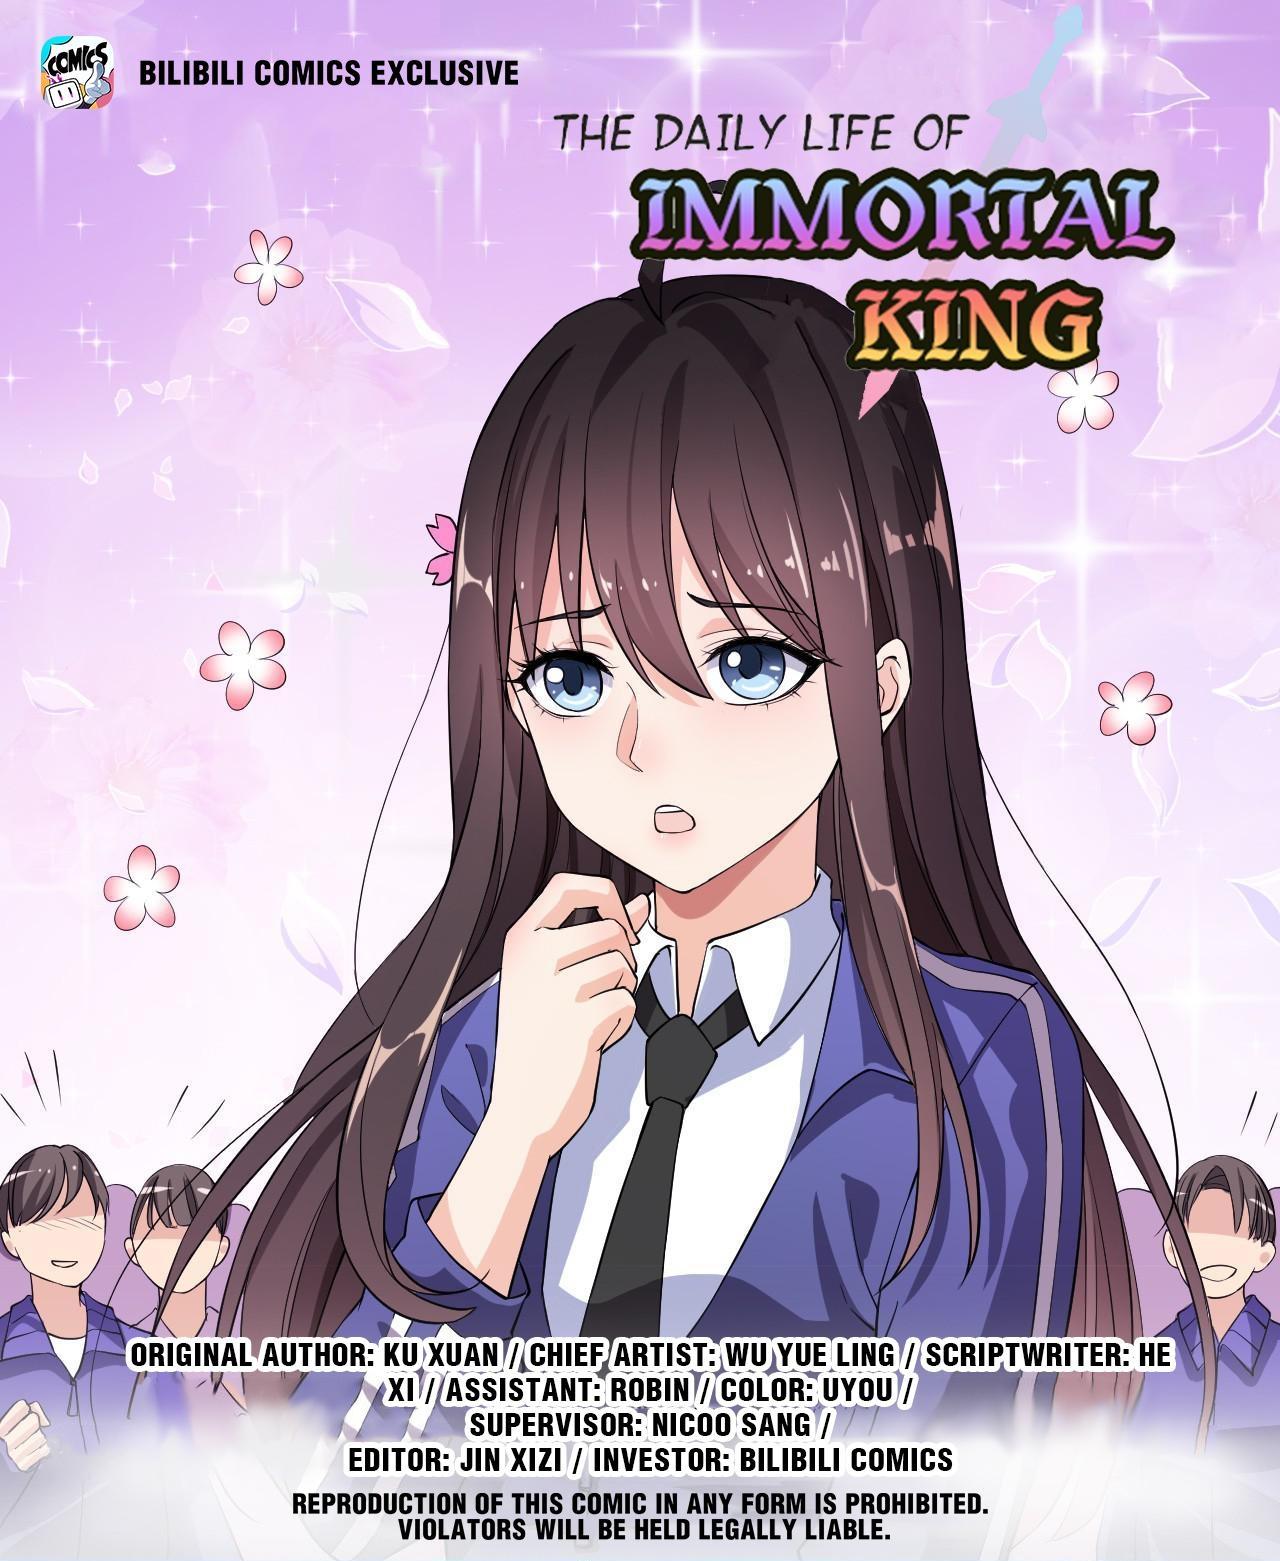 Read The Daily Life Of Immortal King Vol.1 Chapter 17: Can't Tell